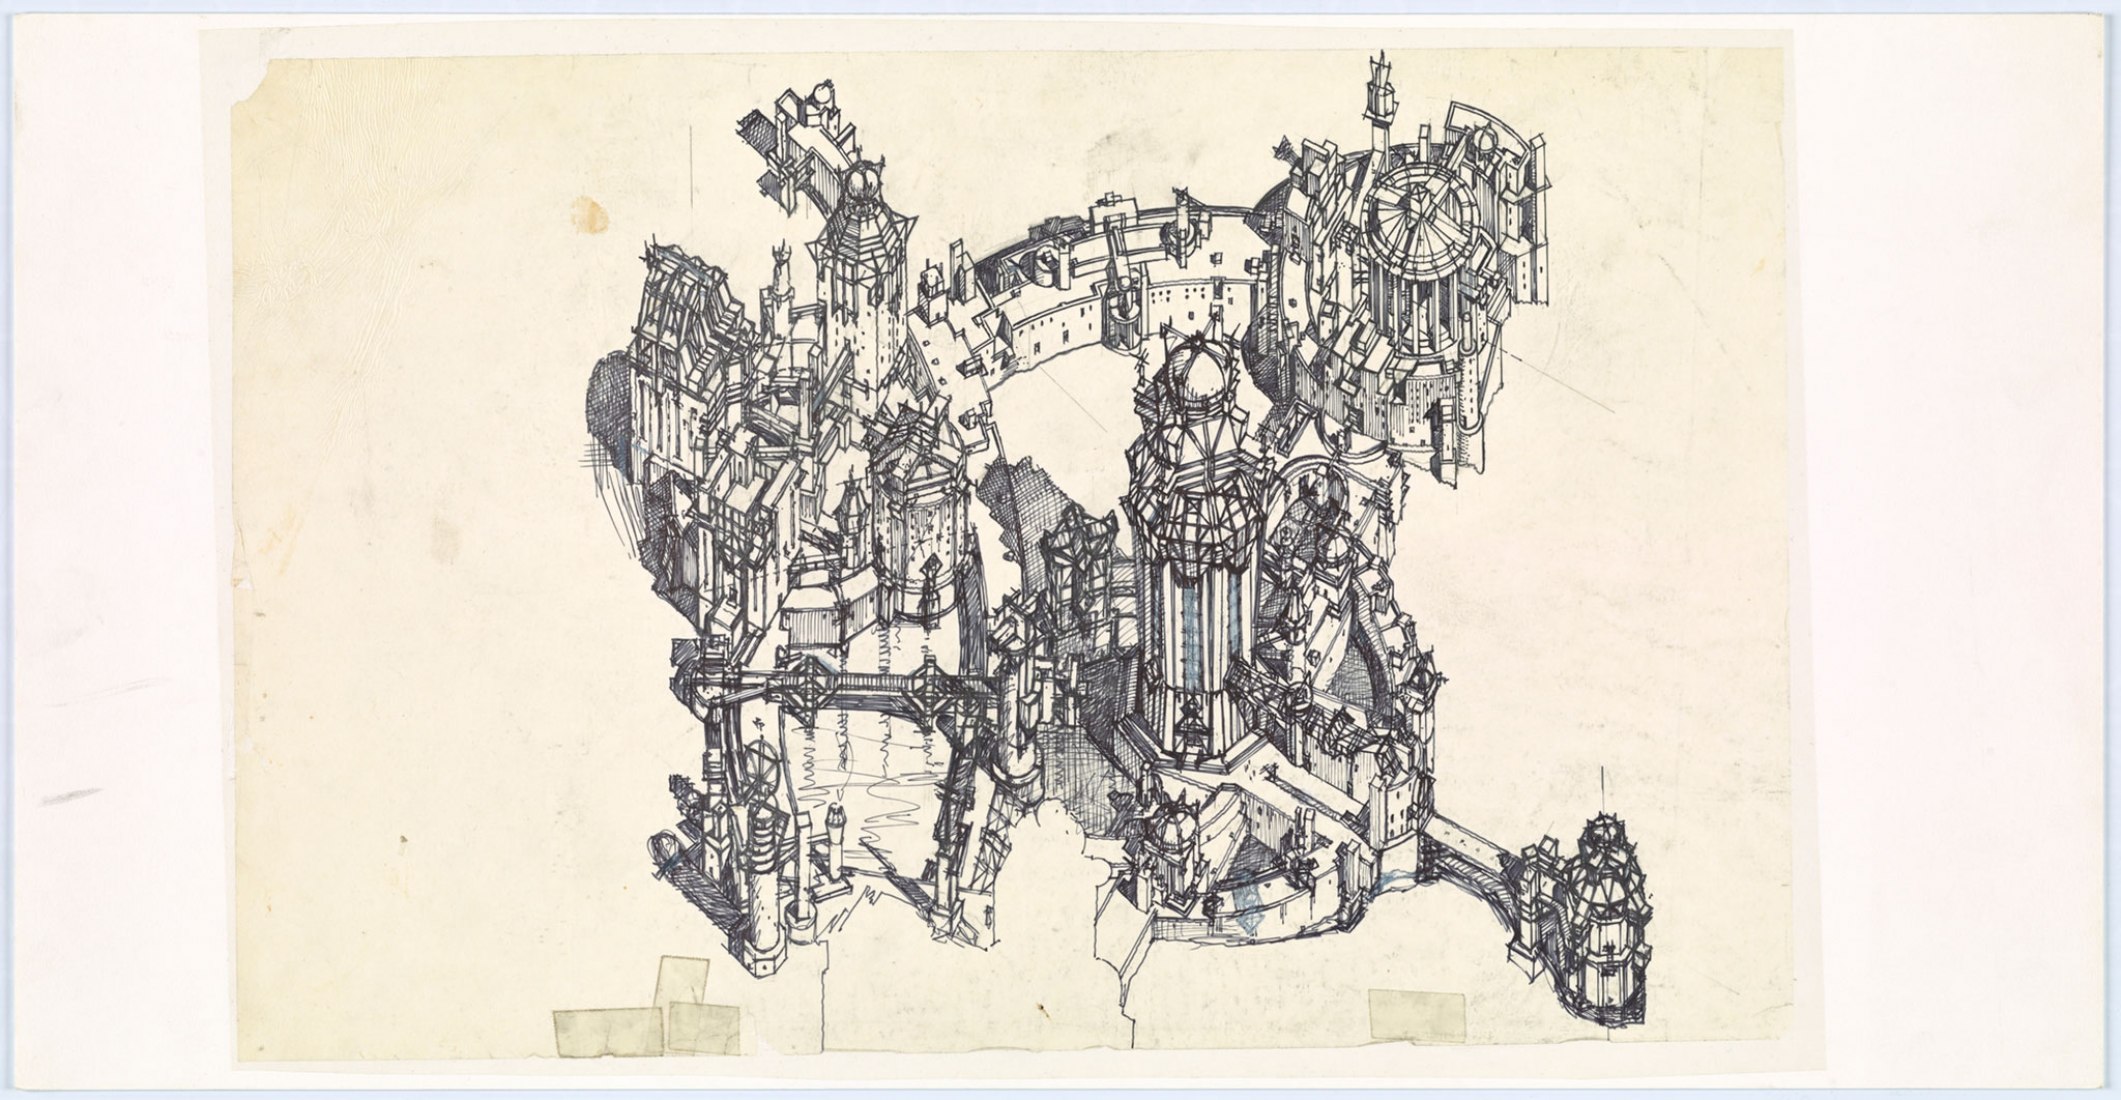 Drawing for A-City, Lebbeus Woods, ca. 1985–1986. Getty Research Institute, 2018.M.24. Acquired with partial support of the GRI Council. © Estate of Lebbeus Woods